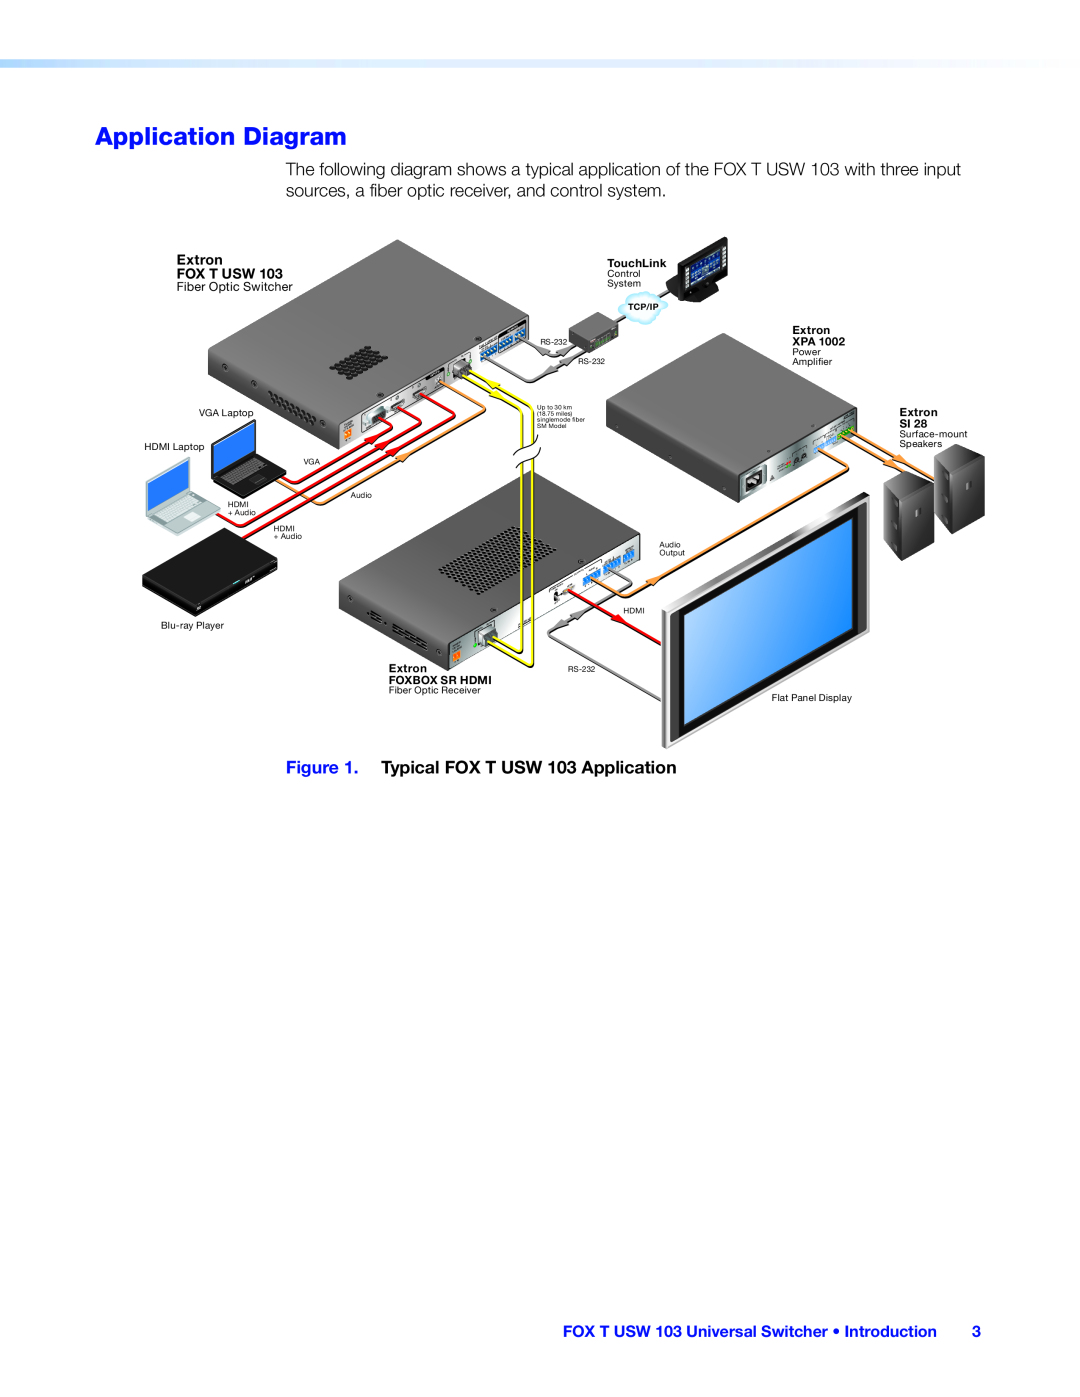 Extron electronic Application Diagram, Typical FOX T USW 103 Application, FOX T USW 103 Universal Switcher Introduction 